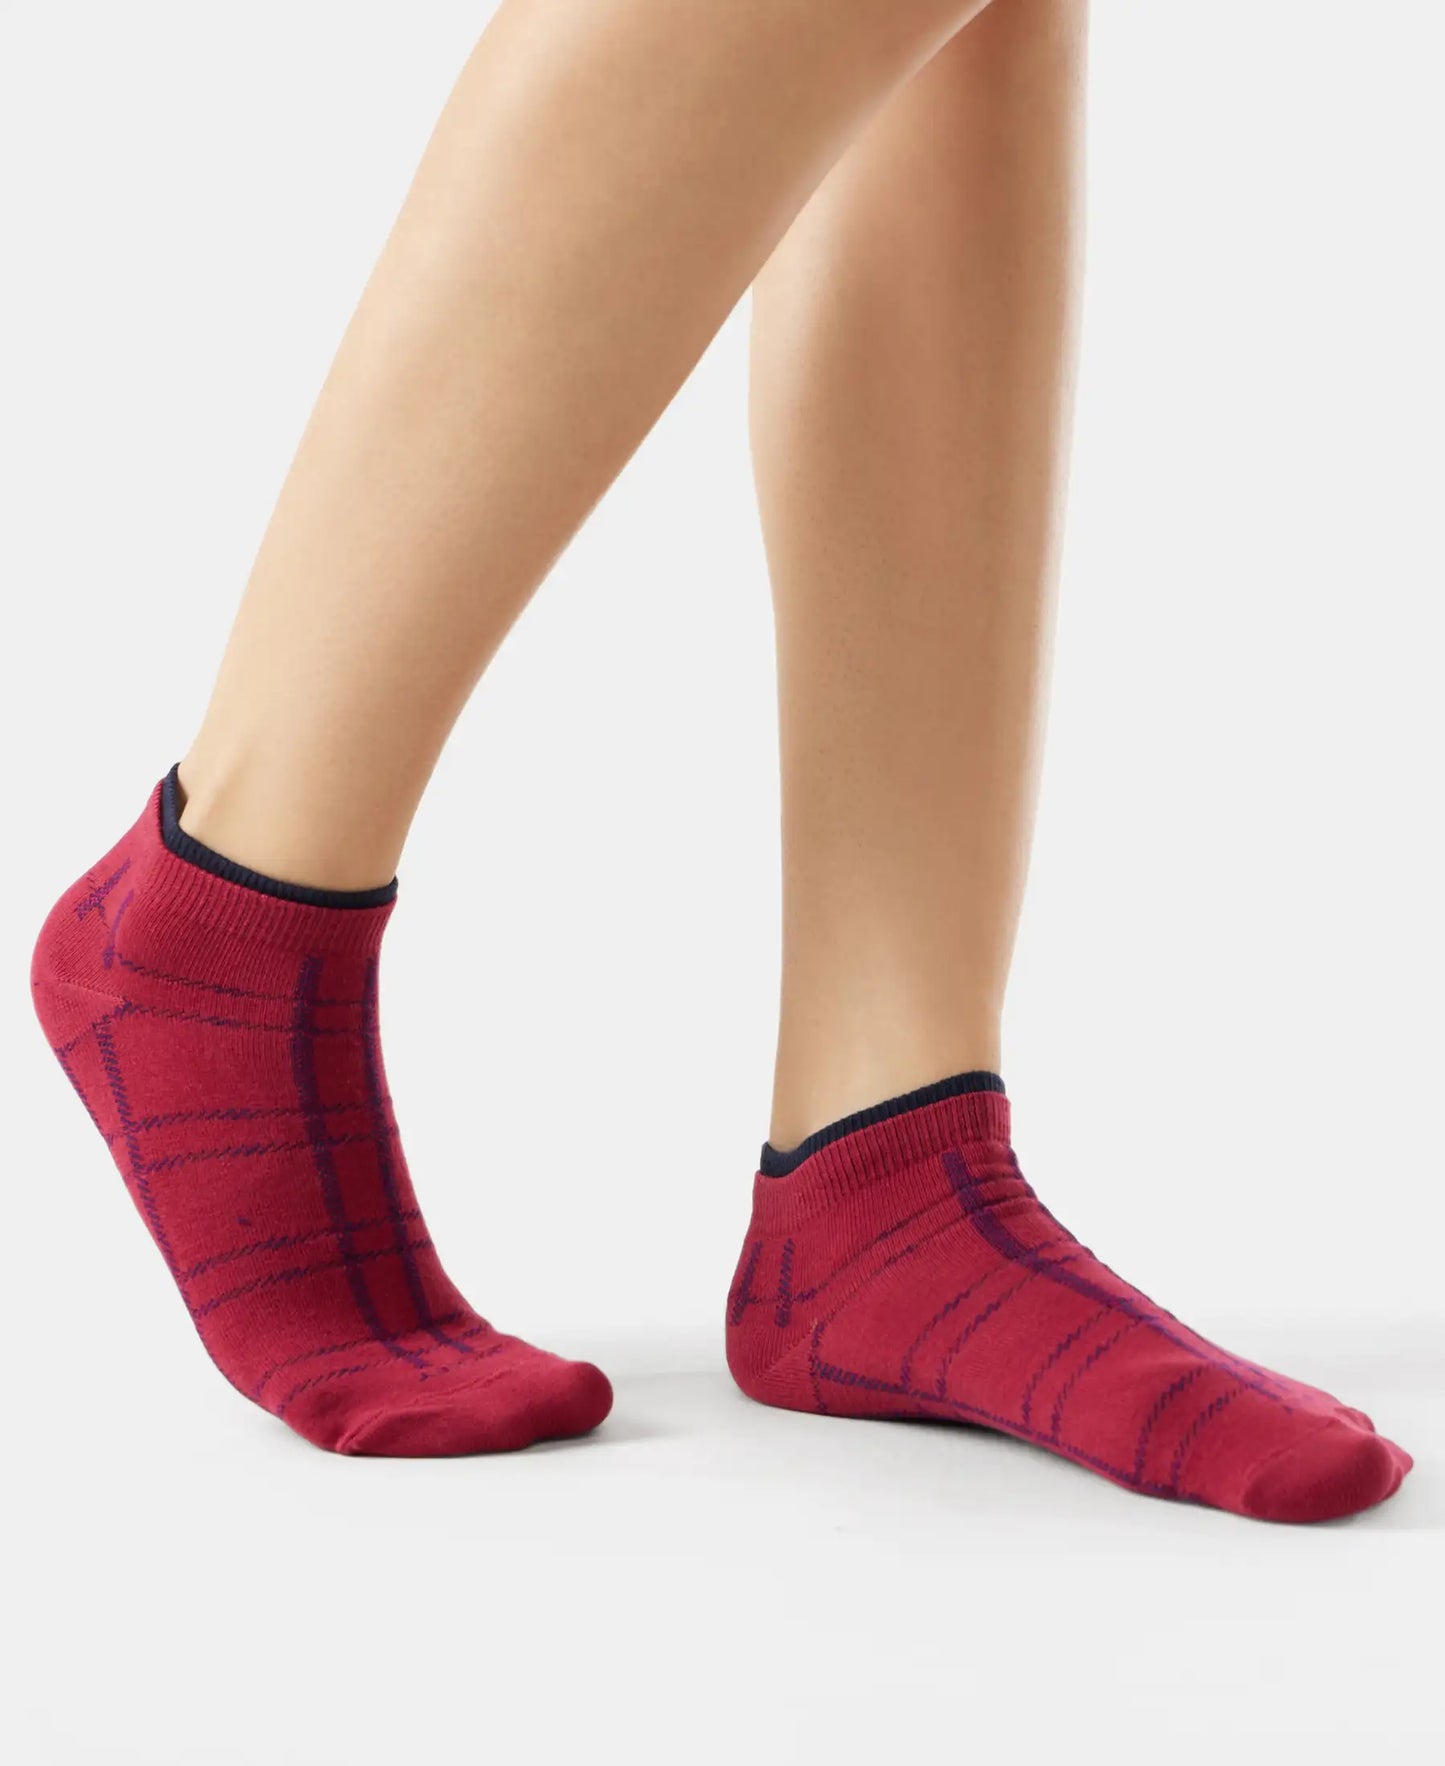 Compact Cotton Stretch Low Show Socks with StayFresh Treatment - Navy & Beet Red-4